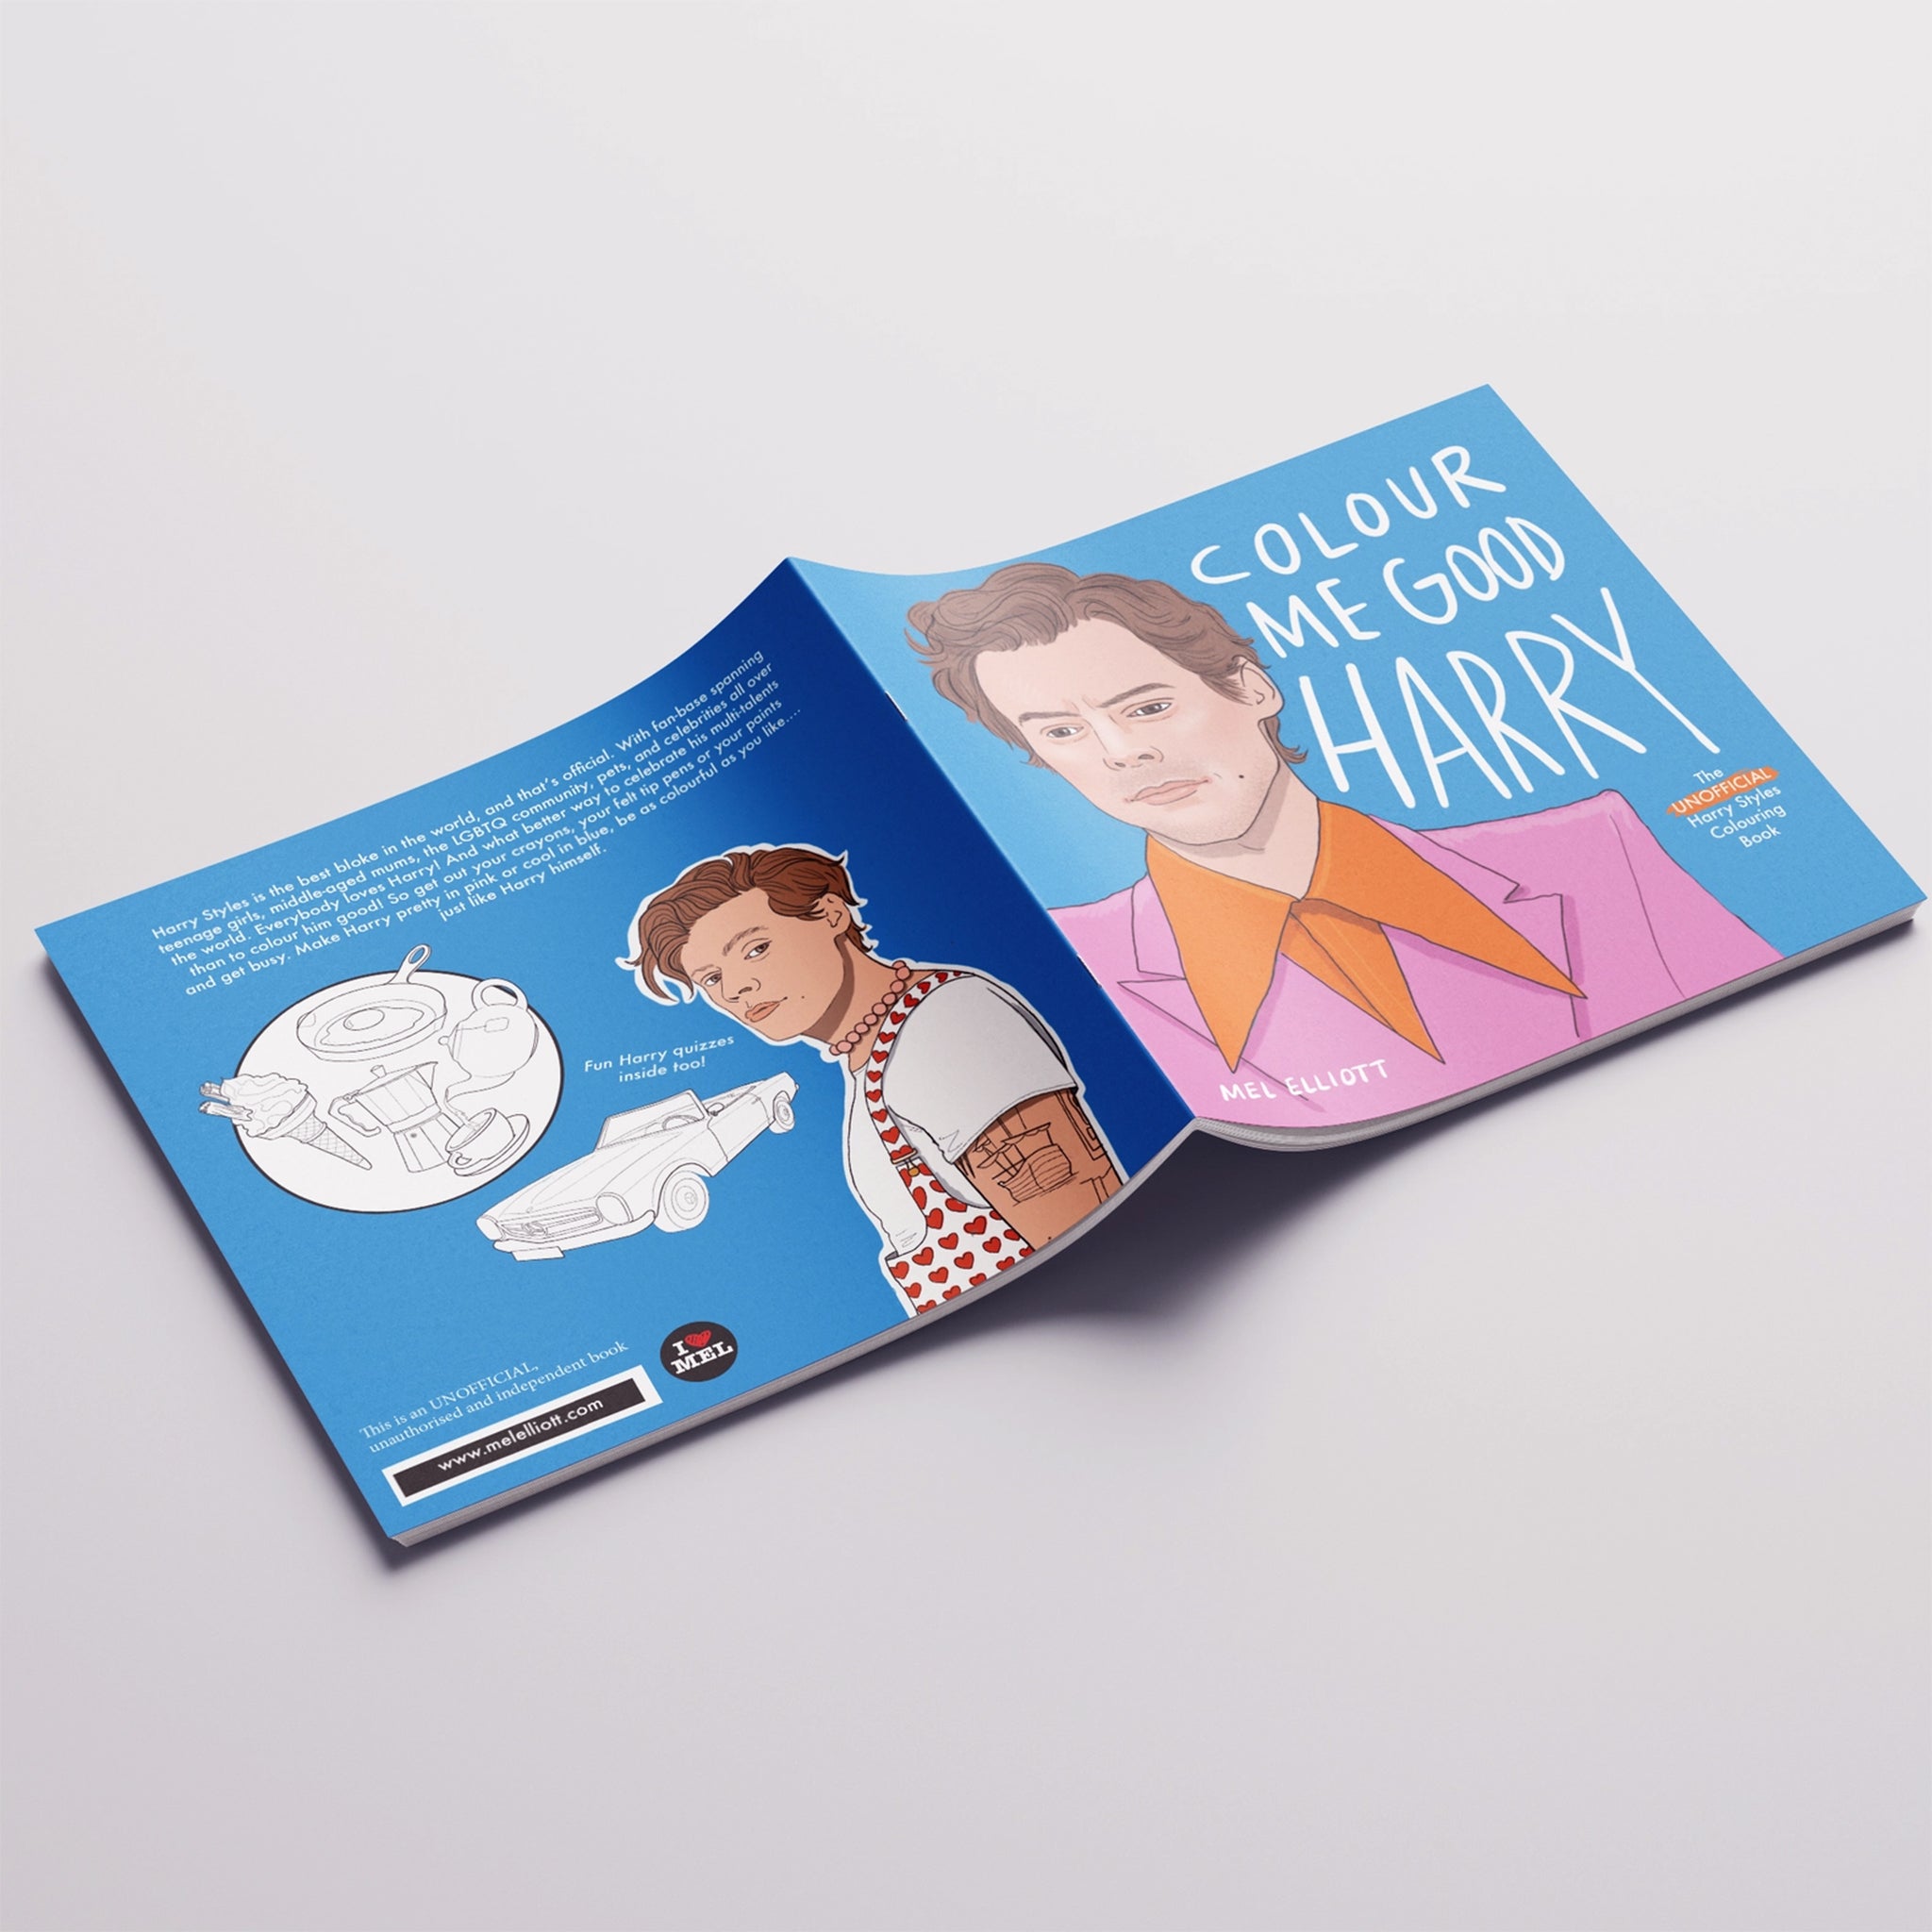 On a grey background is a blue coloring book cover with an illustration of Harry Styles and text that reads, &quot;Colour Me Good Harry&quot;.